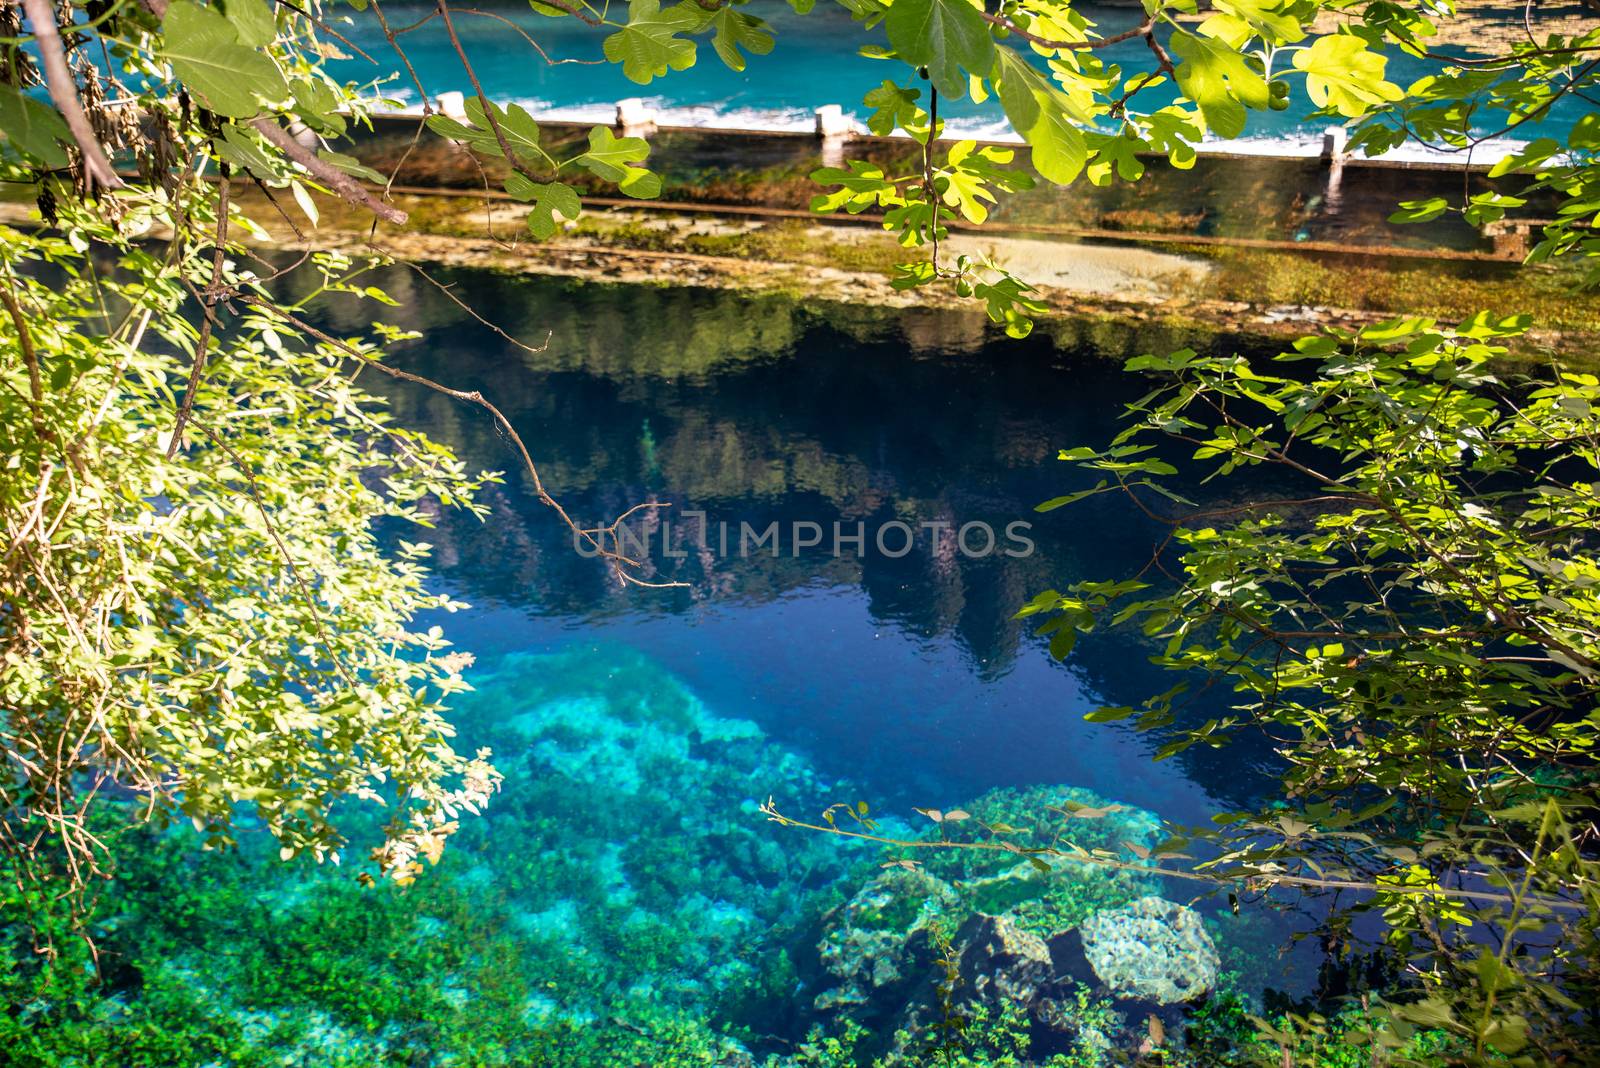 styphon river with clear, blue water where children bathe and picnic in summer